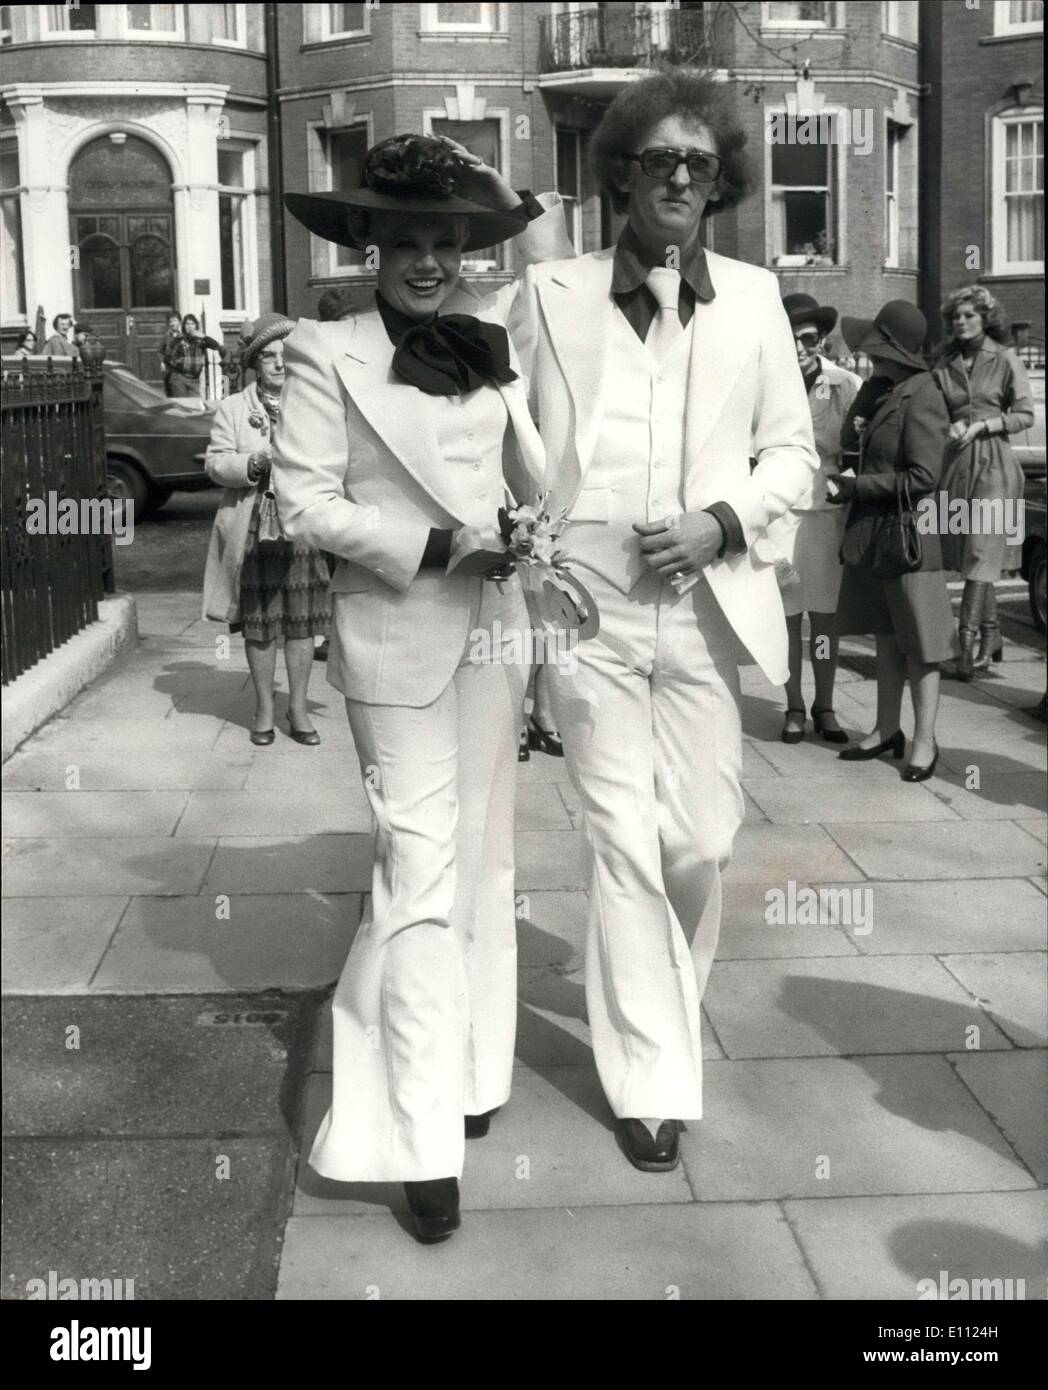 Apr. 21, 1975 - Diana Harvey Weds. Glamorous Diana Harvey, singer and leading lady in the Benny Hill TV series, was married today at Kensington Registry Office, to her musical director, Terry Gittings. Diana is currently appearing in cabaret at the Savoy Hotel, London. Keystone Photo Shows: the happy couple, both in white trousers suits, pictured after the ceremony today. Stock Photo